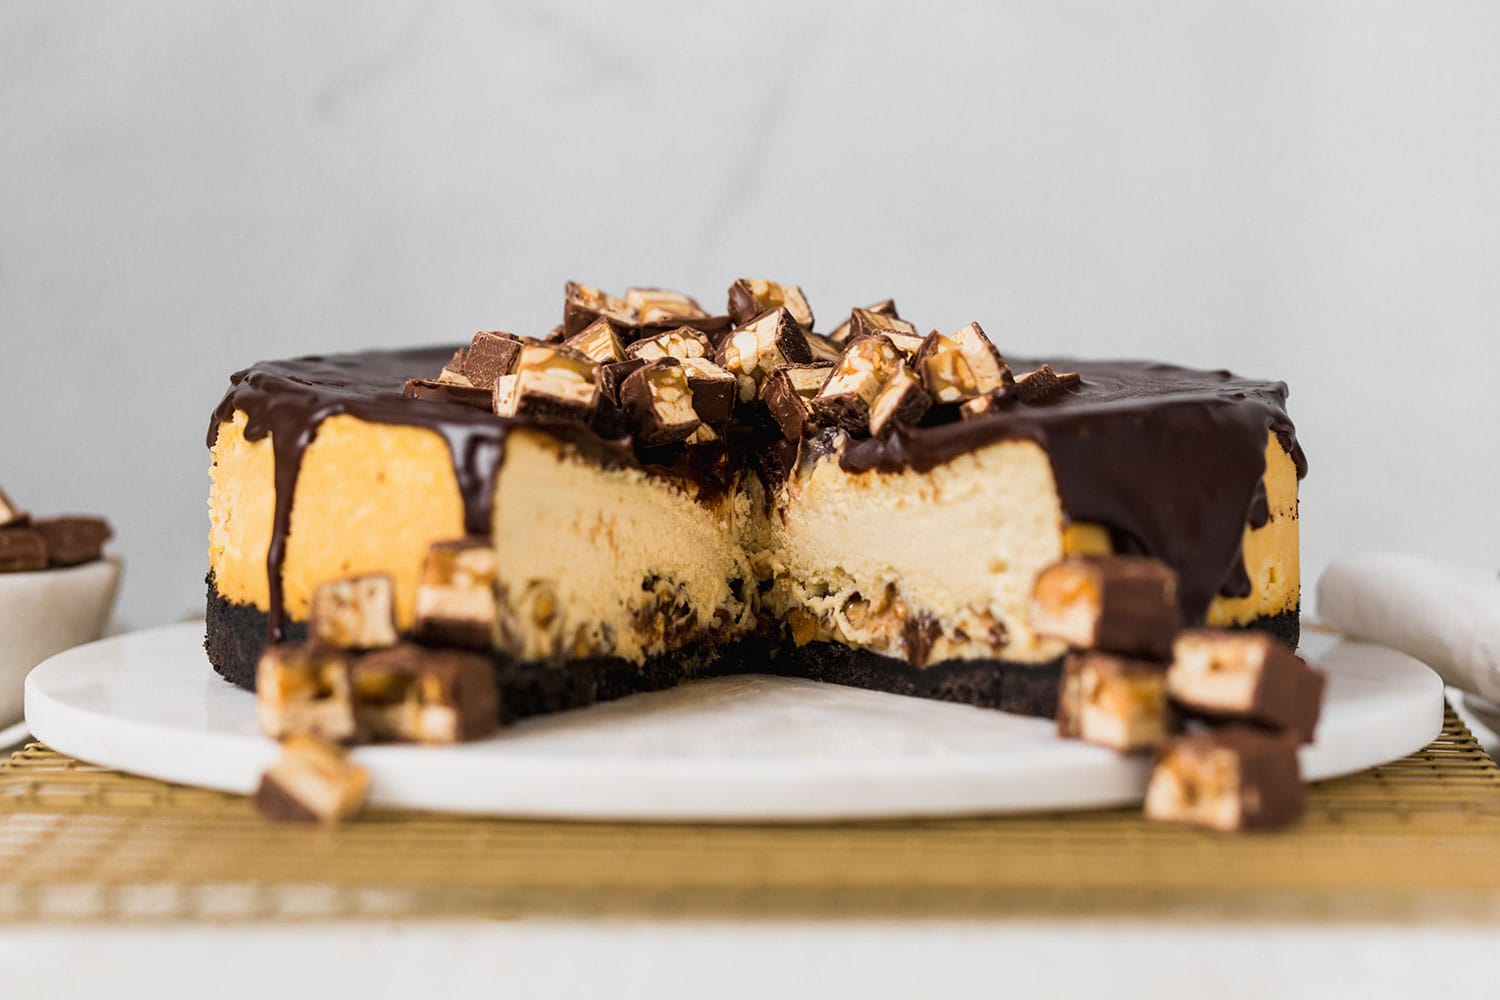 Snickers Cheesecake recipe with Oreo crust, cheesecake filling loaded with Snickers, thick chocolate ganache, and more Snickers on top! Ultimate decadence.